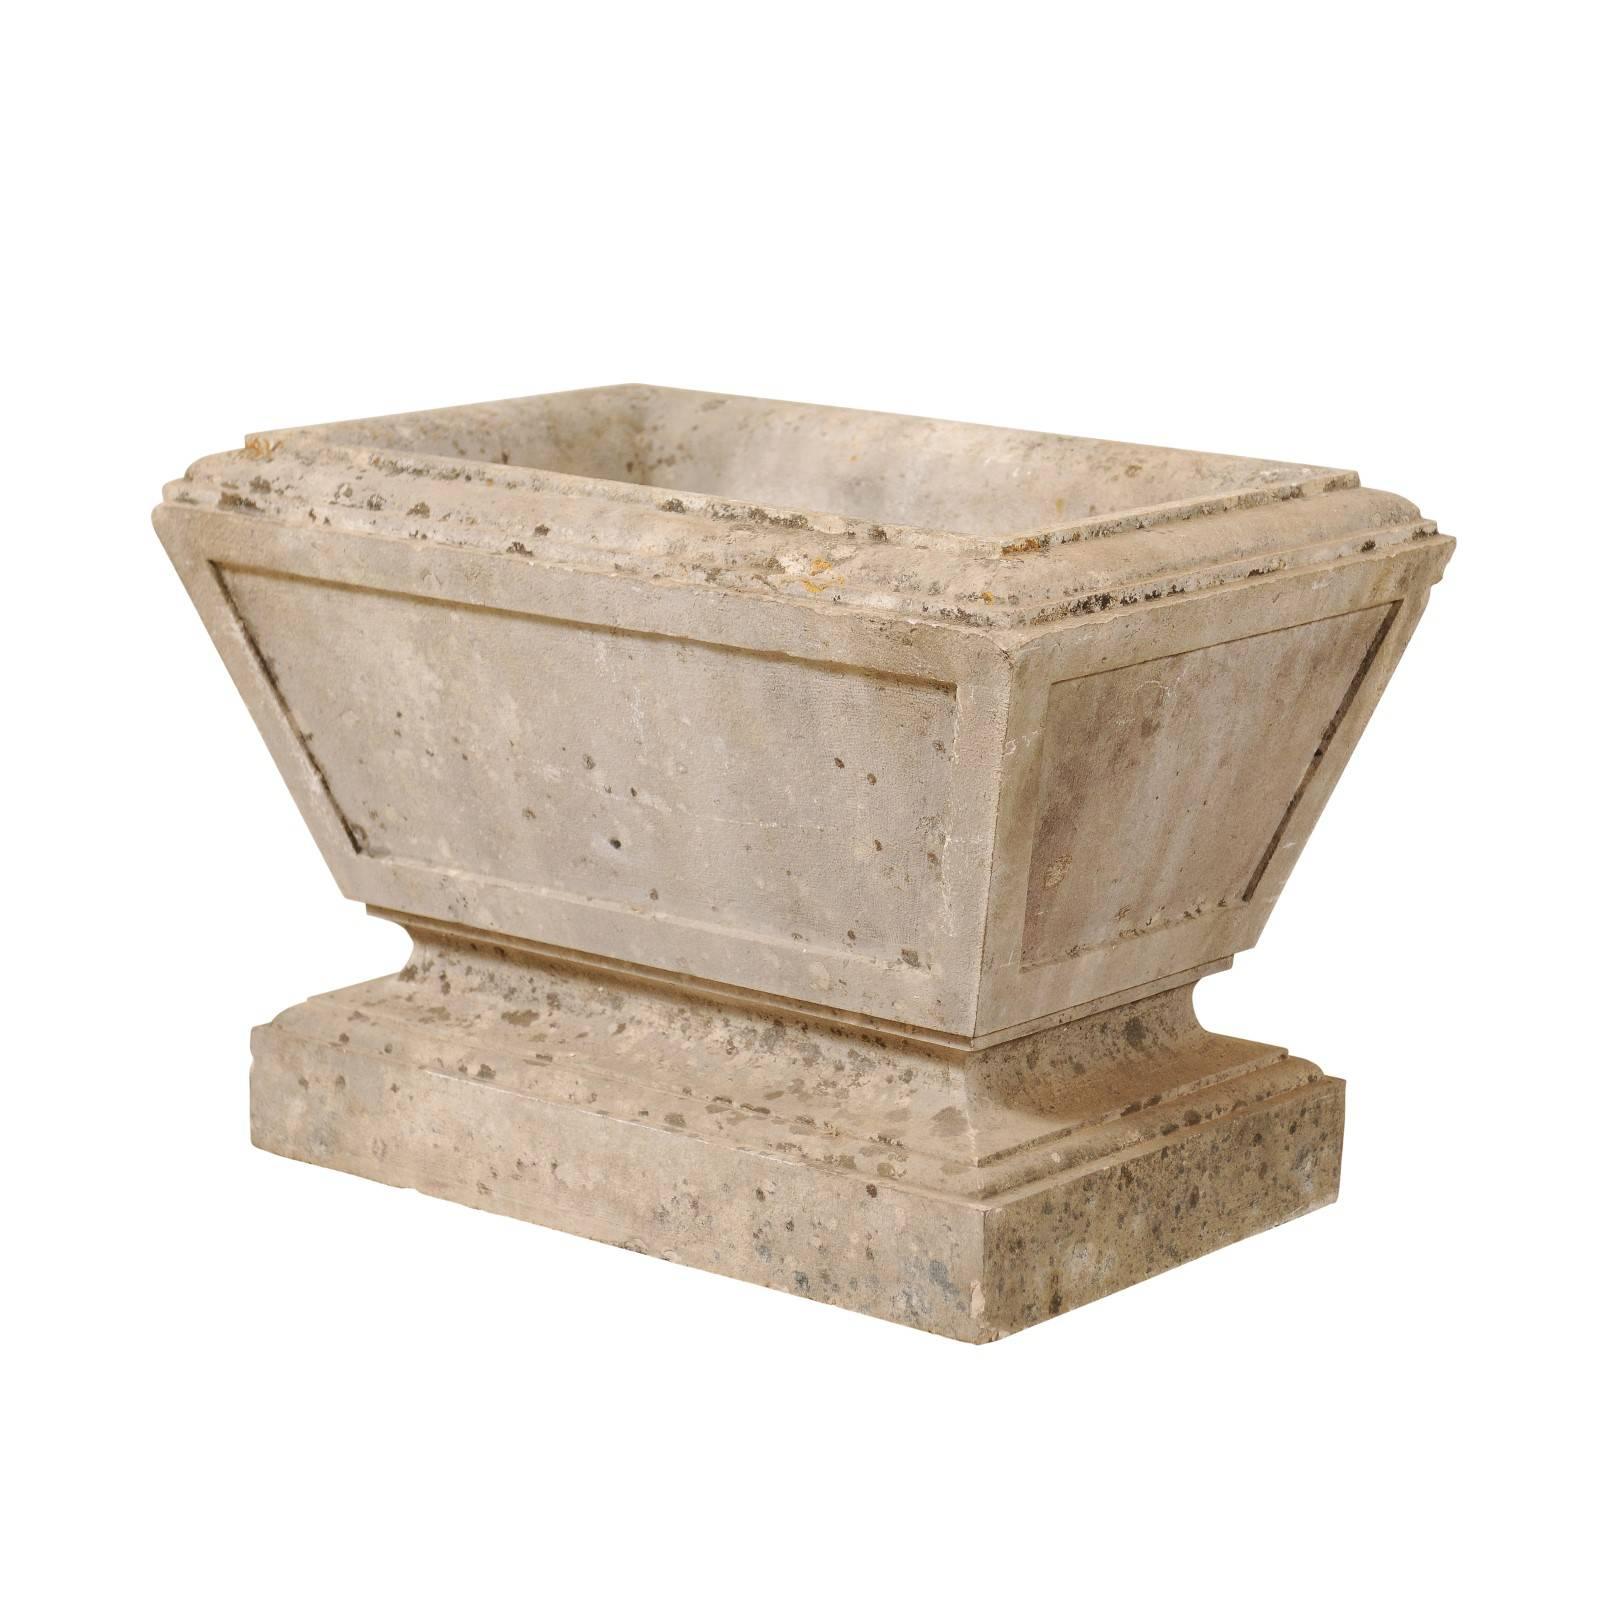 European Hand-Carved Rectangular Tapered Stone Planter, Early 20th Century